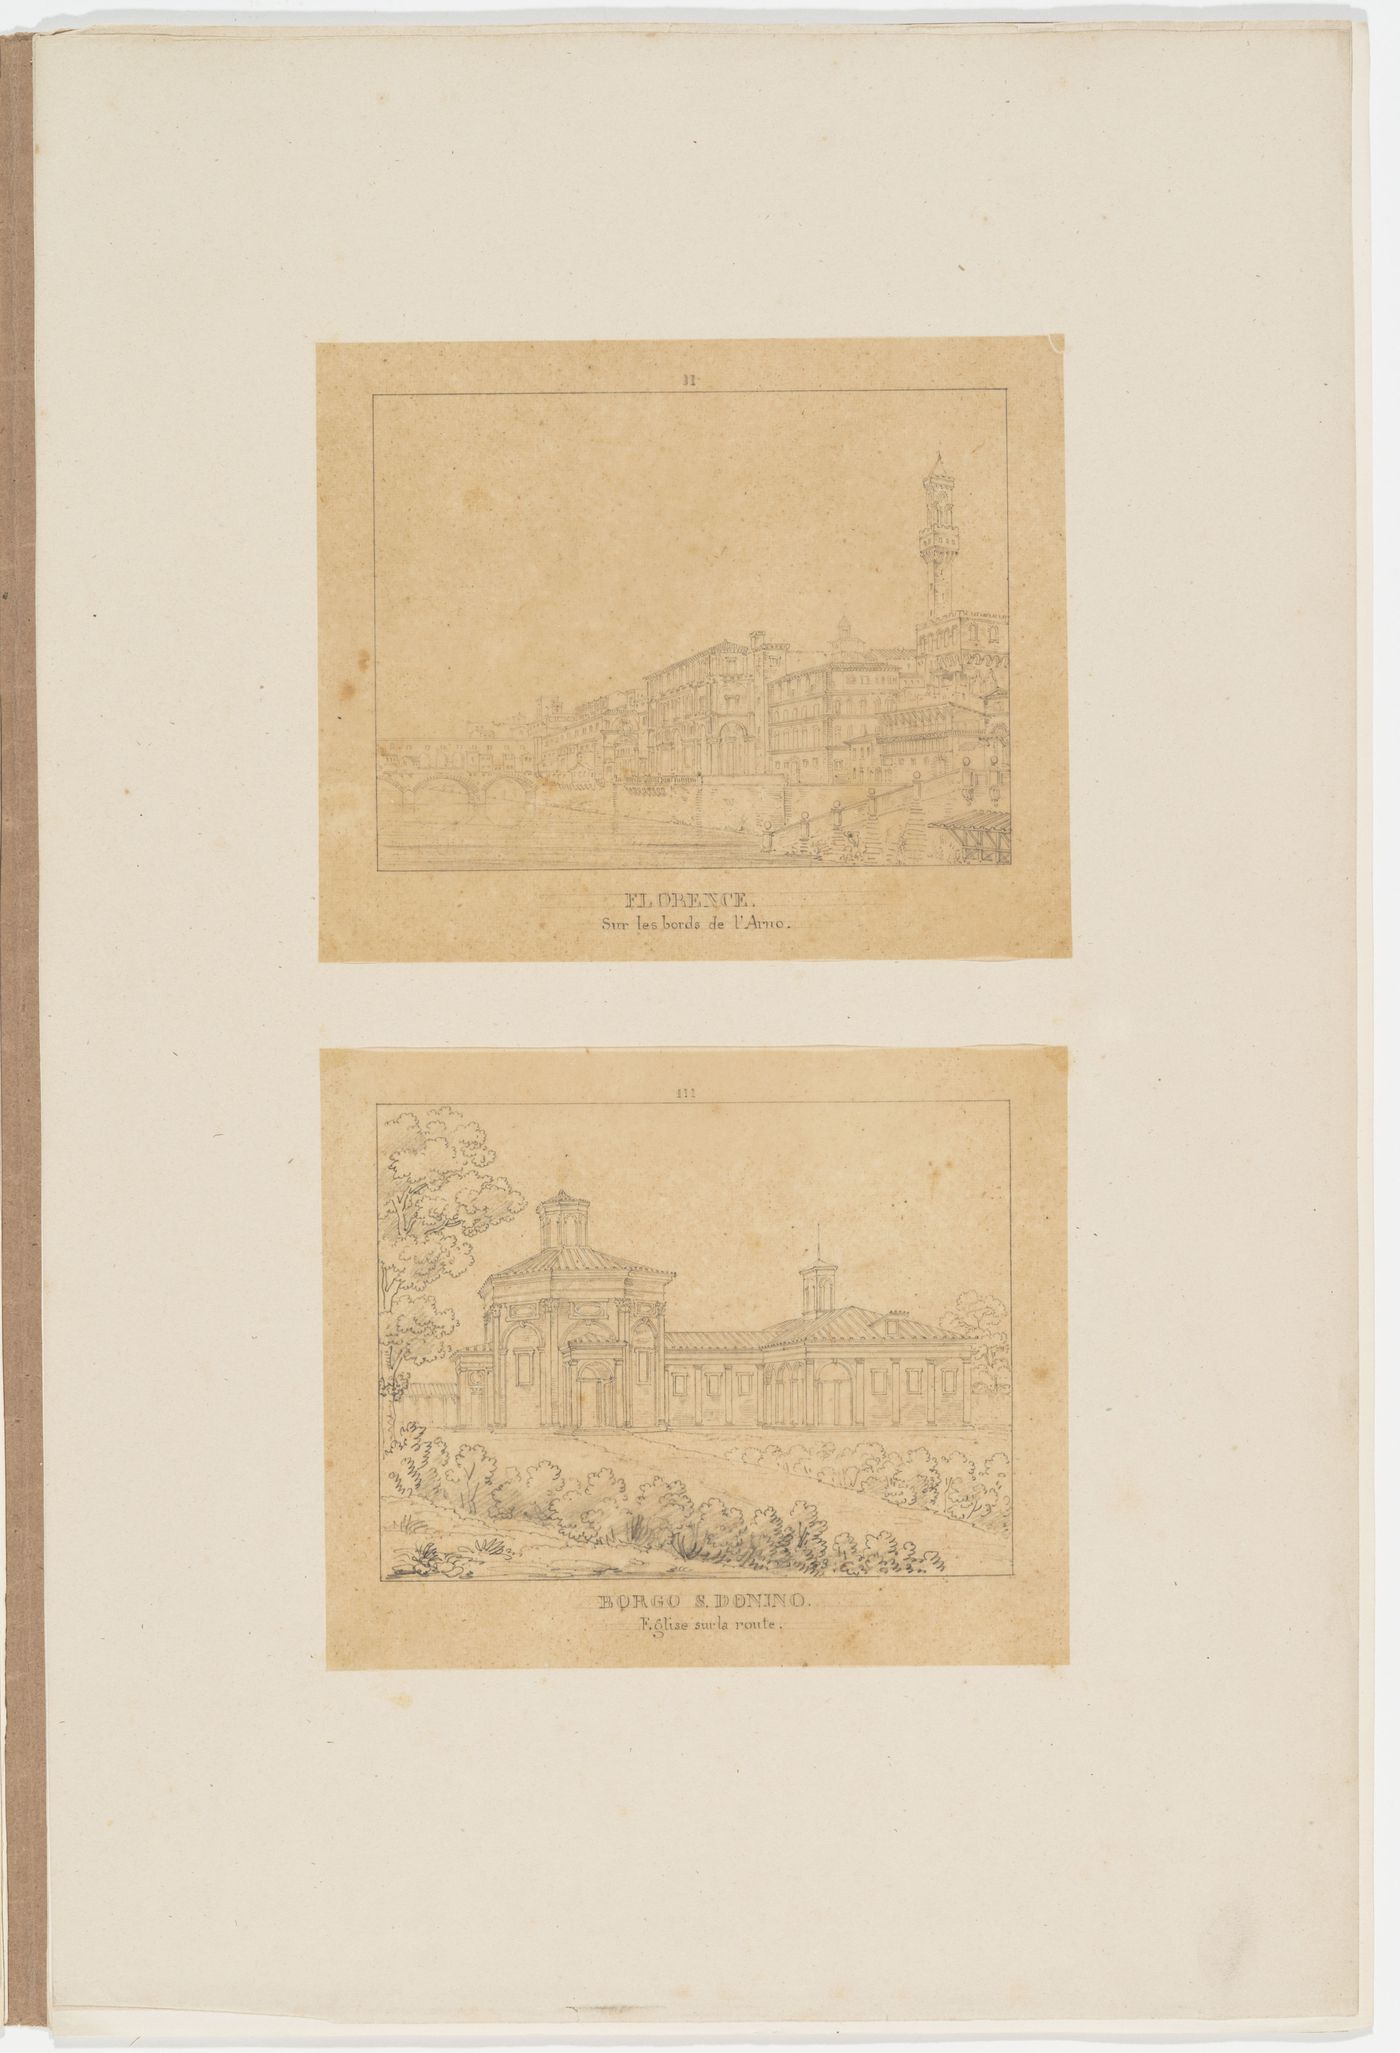 View of Florence from the bank of the Arno River; View of the church Borgo S. Donino, Fidenza